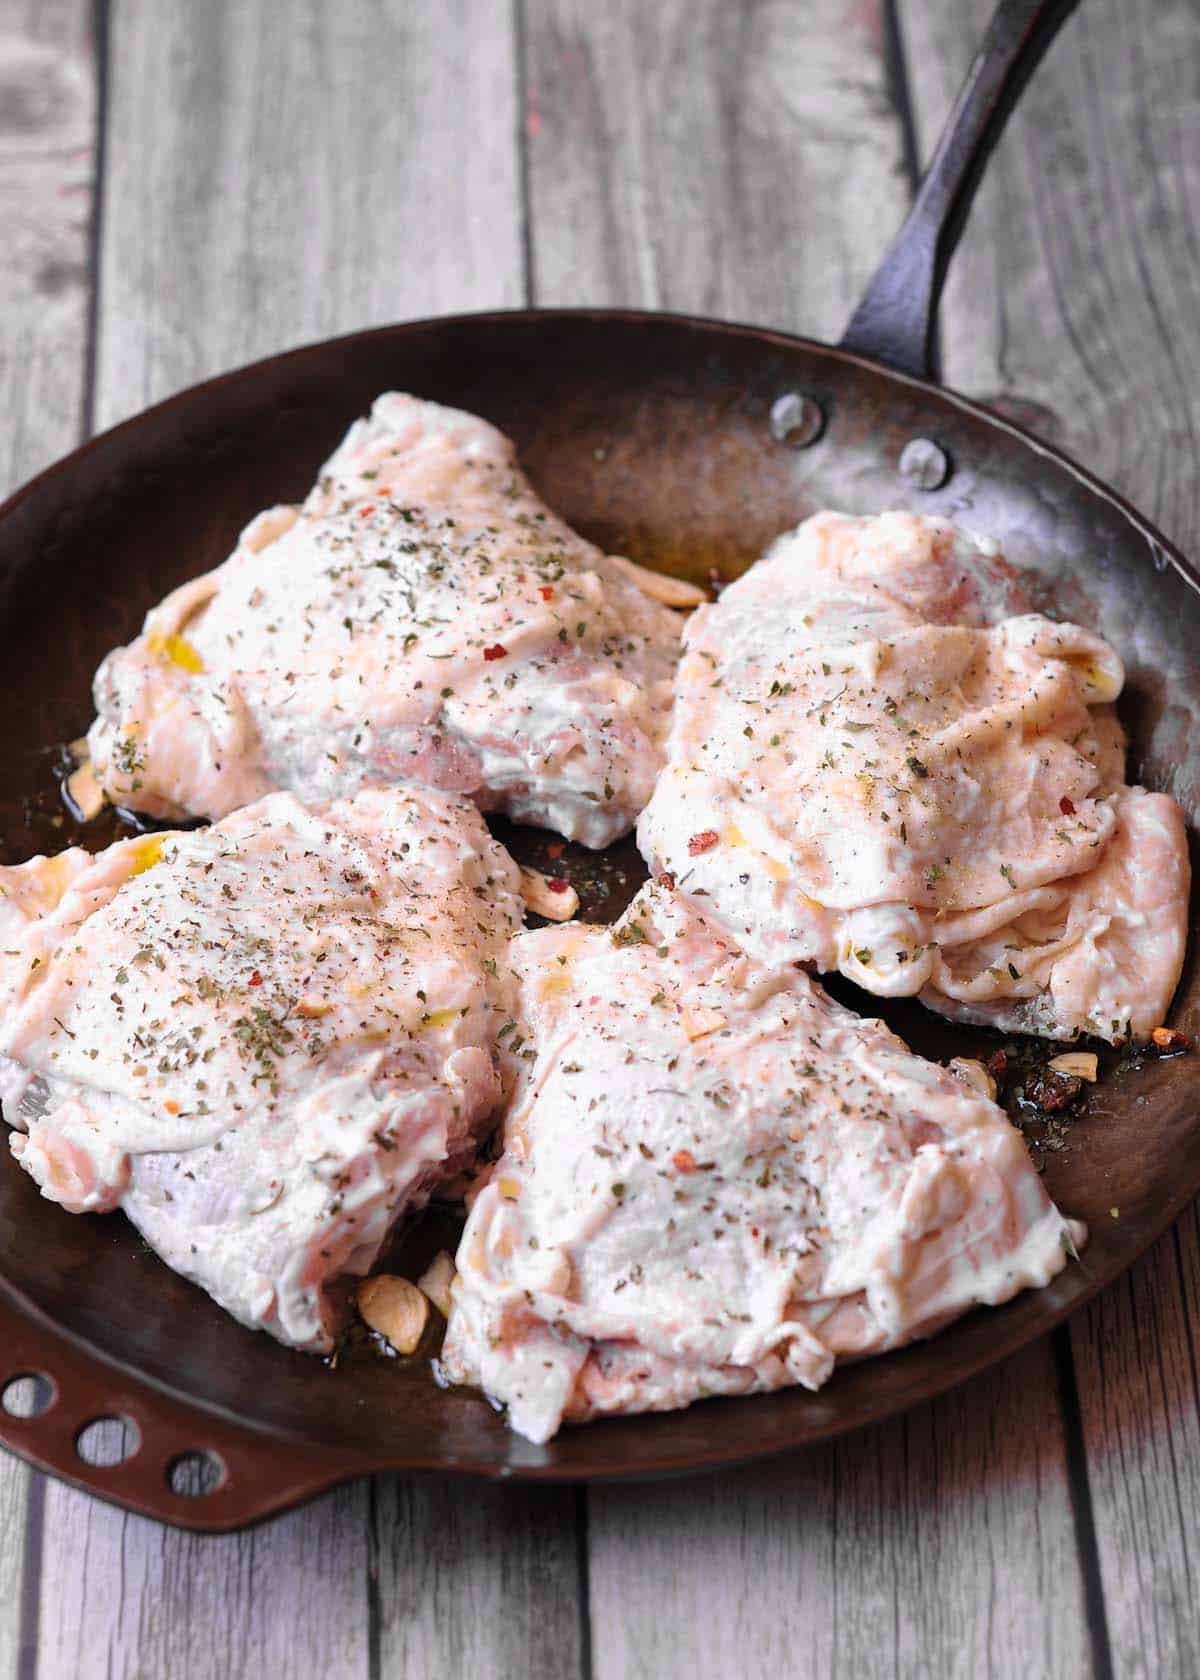 Coated chicken thighs